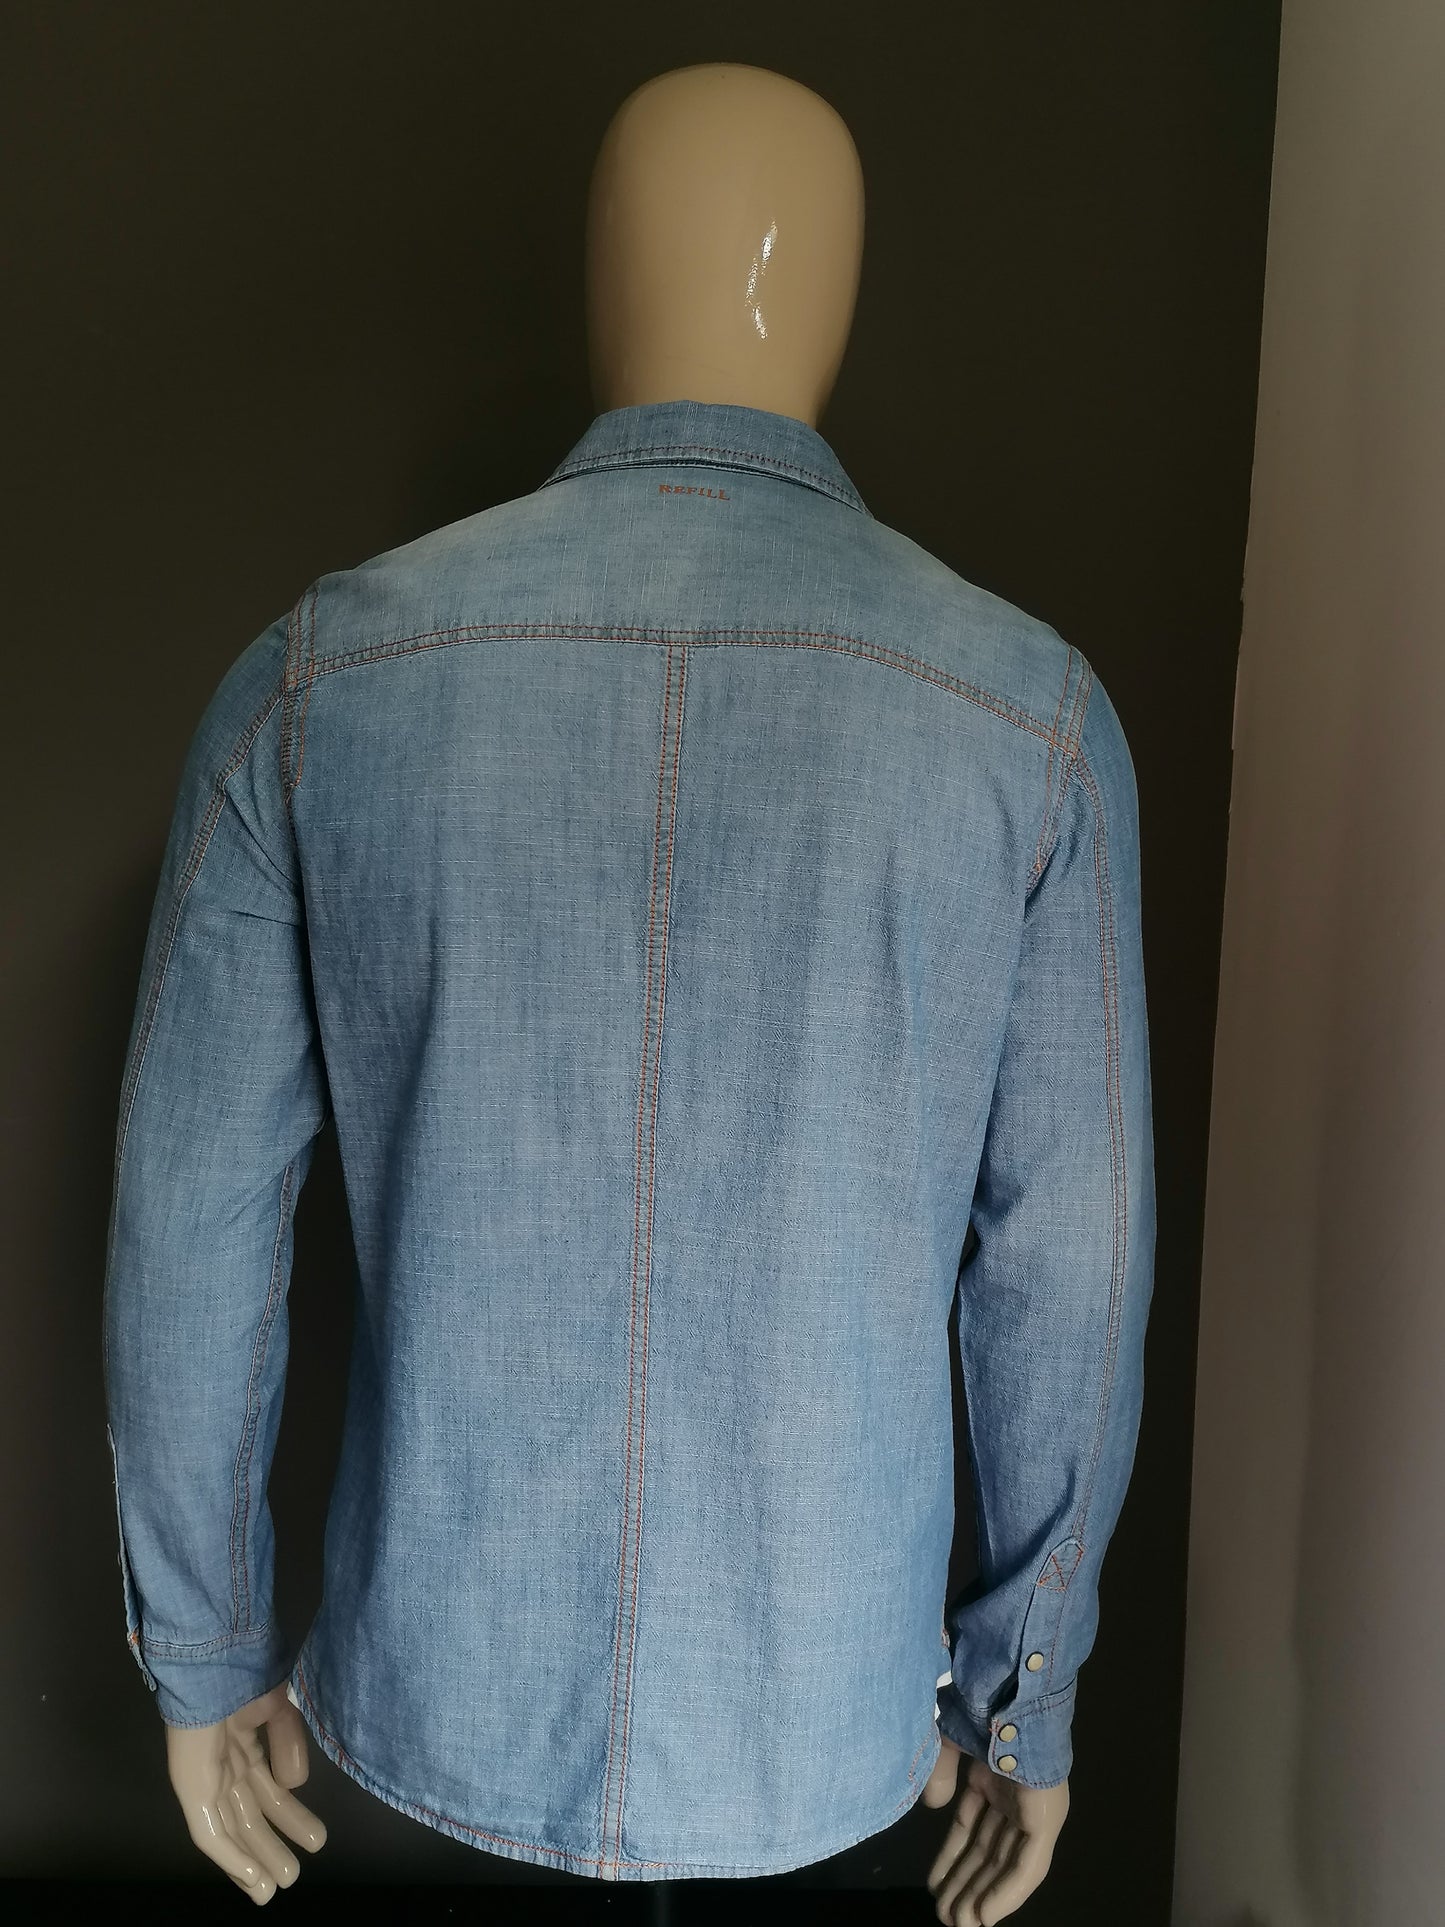 Refill jeans / denim shirt with press studs. Blue colored. Size L.